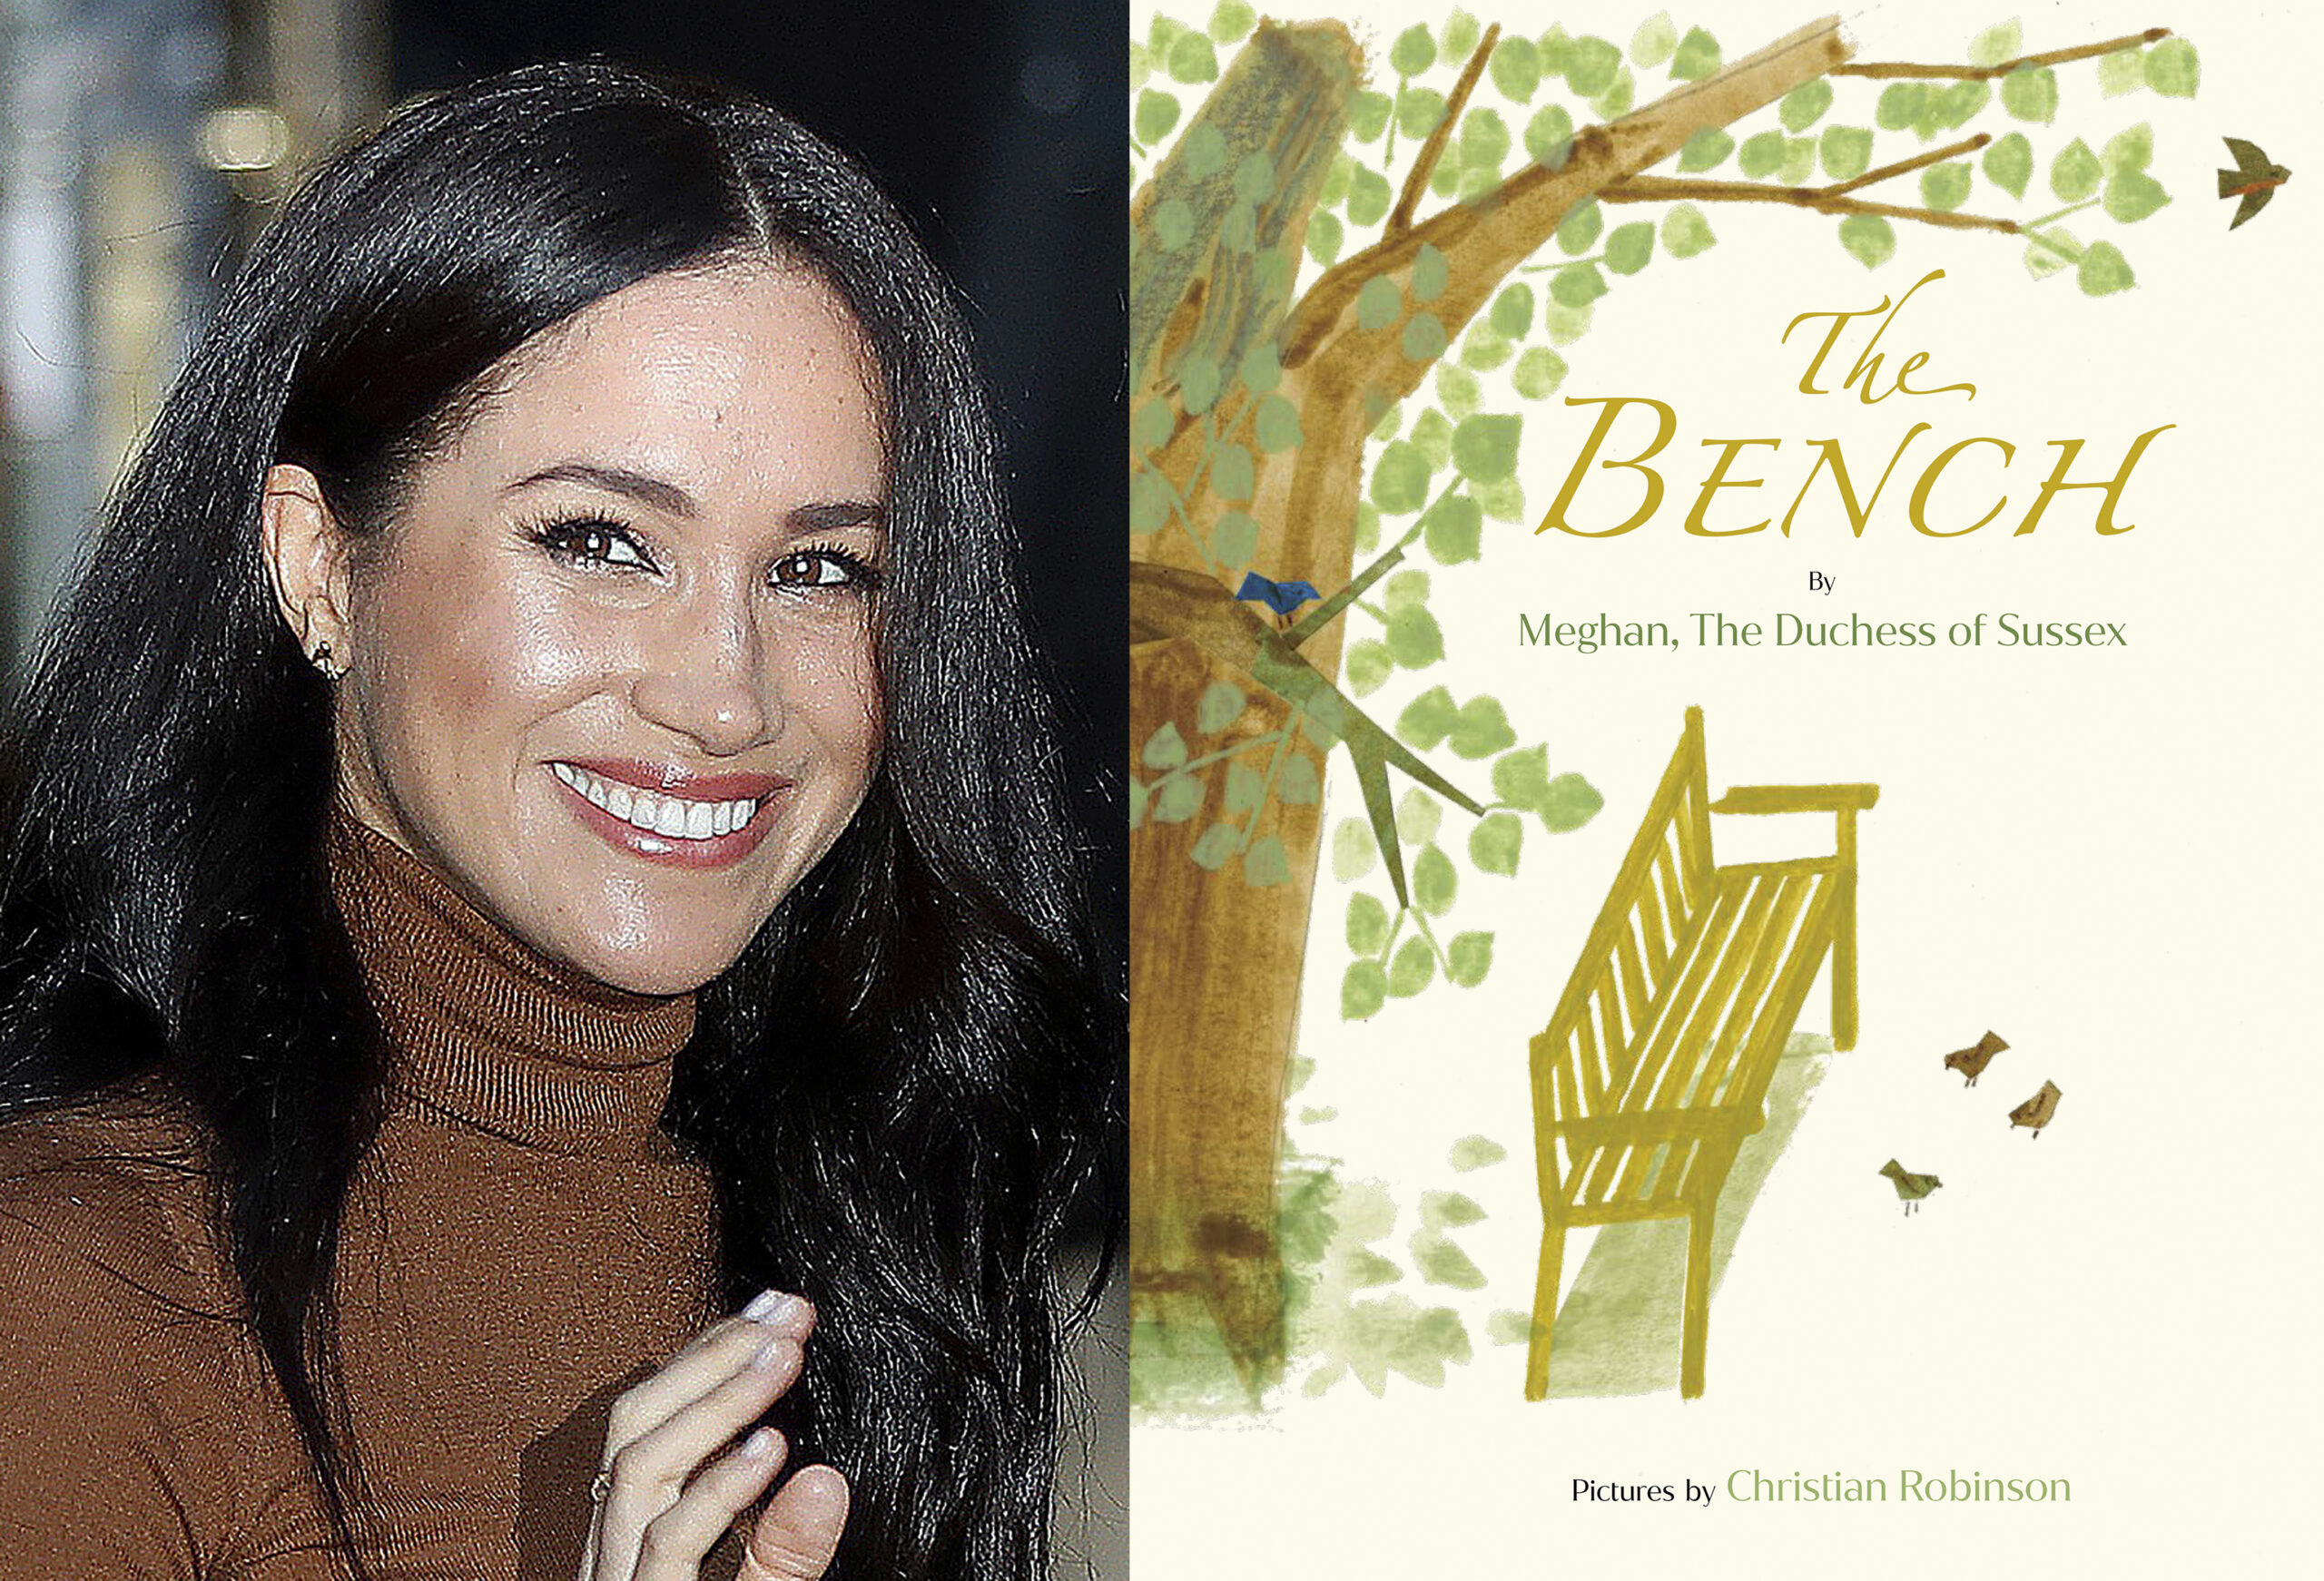 This combination photo shows Meghan, Duchess of Sussex leaving Canada House in London, on Jan. 7, 2020, left, and cover art for her upcoming children's book "The Bench," with pictures by Christian Robinson. The book publishes on June 8. (AP Photo, left, and Random House Children's Books via AP)